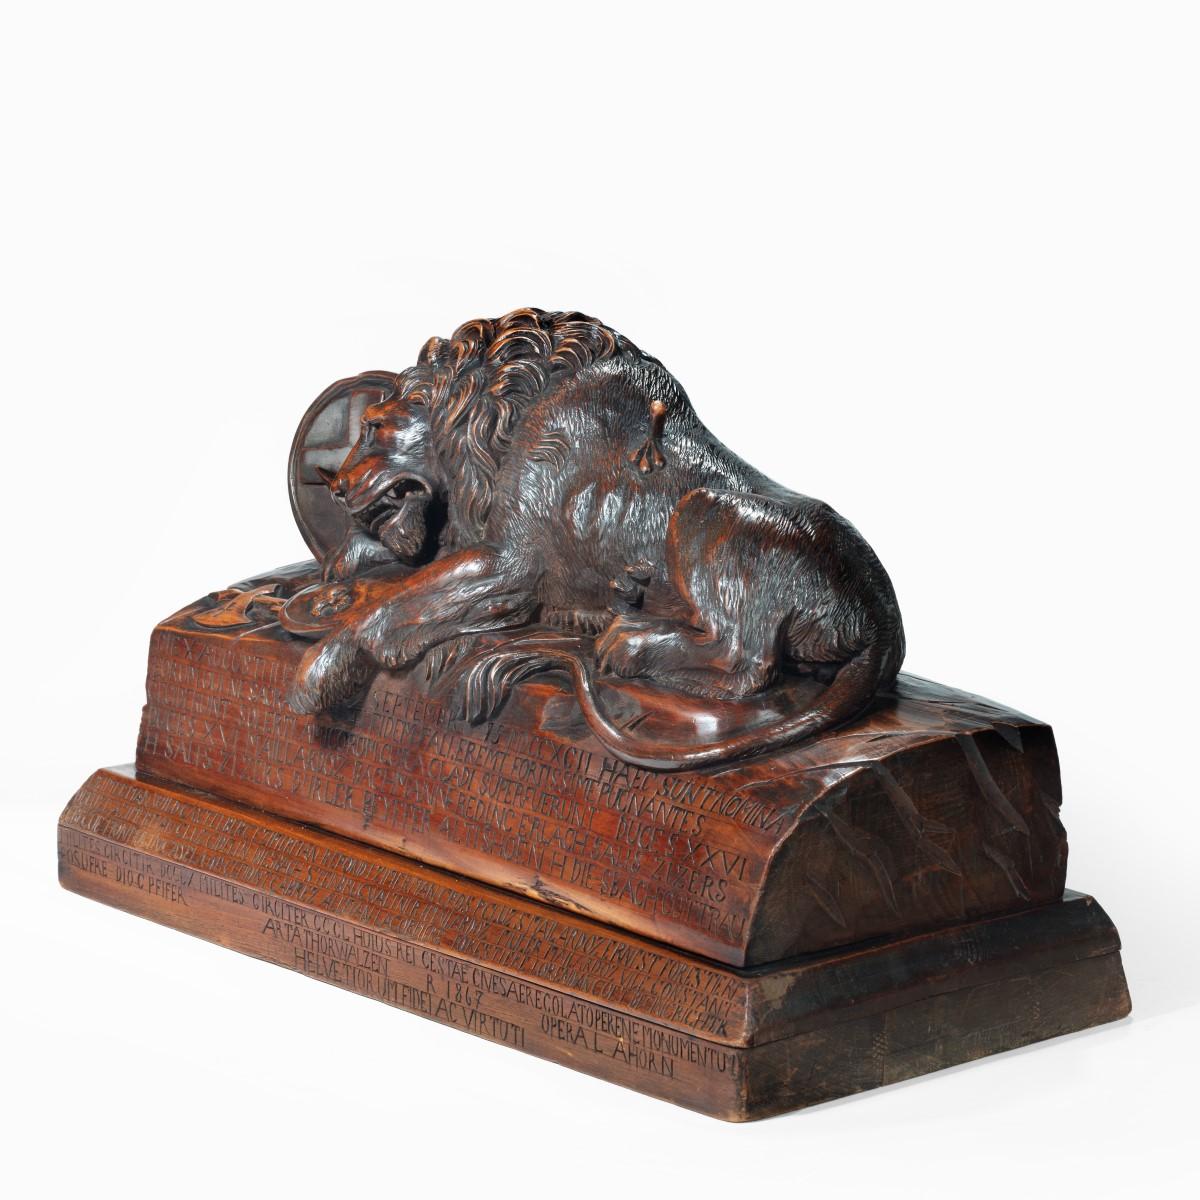 A large Black Forest model of the Lion of Lucerne dated 1867, after Bertel Thorvaldsen, carved from stained linden wood, the dying lion depicted beside two circular shields and an axe carved with crosses and fleurs de lys, set on a stepped base,